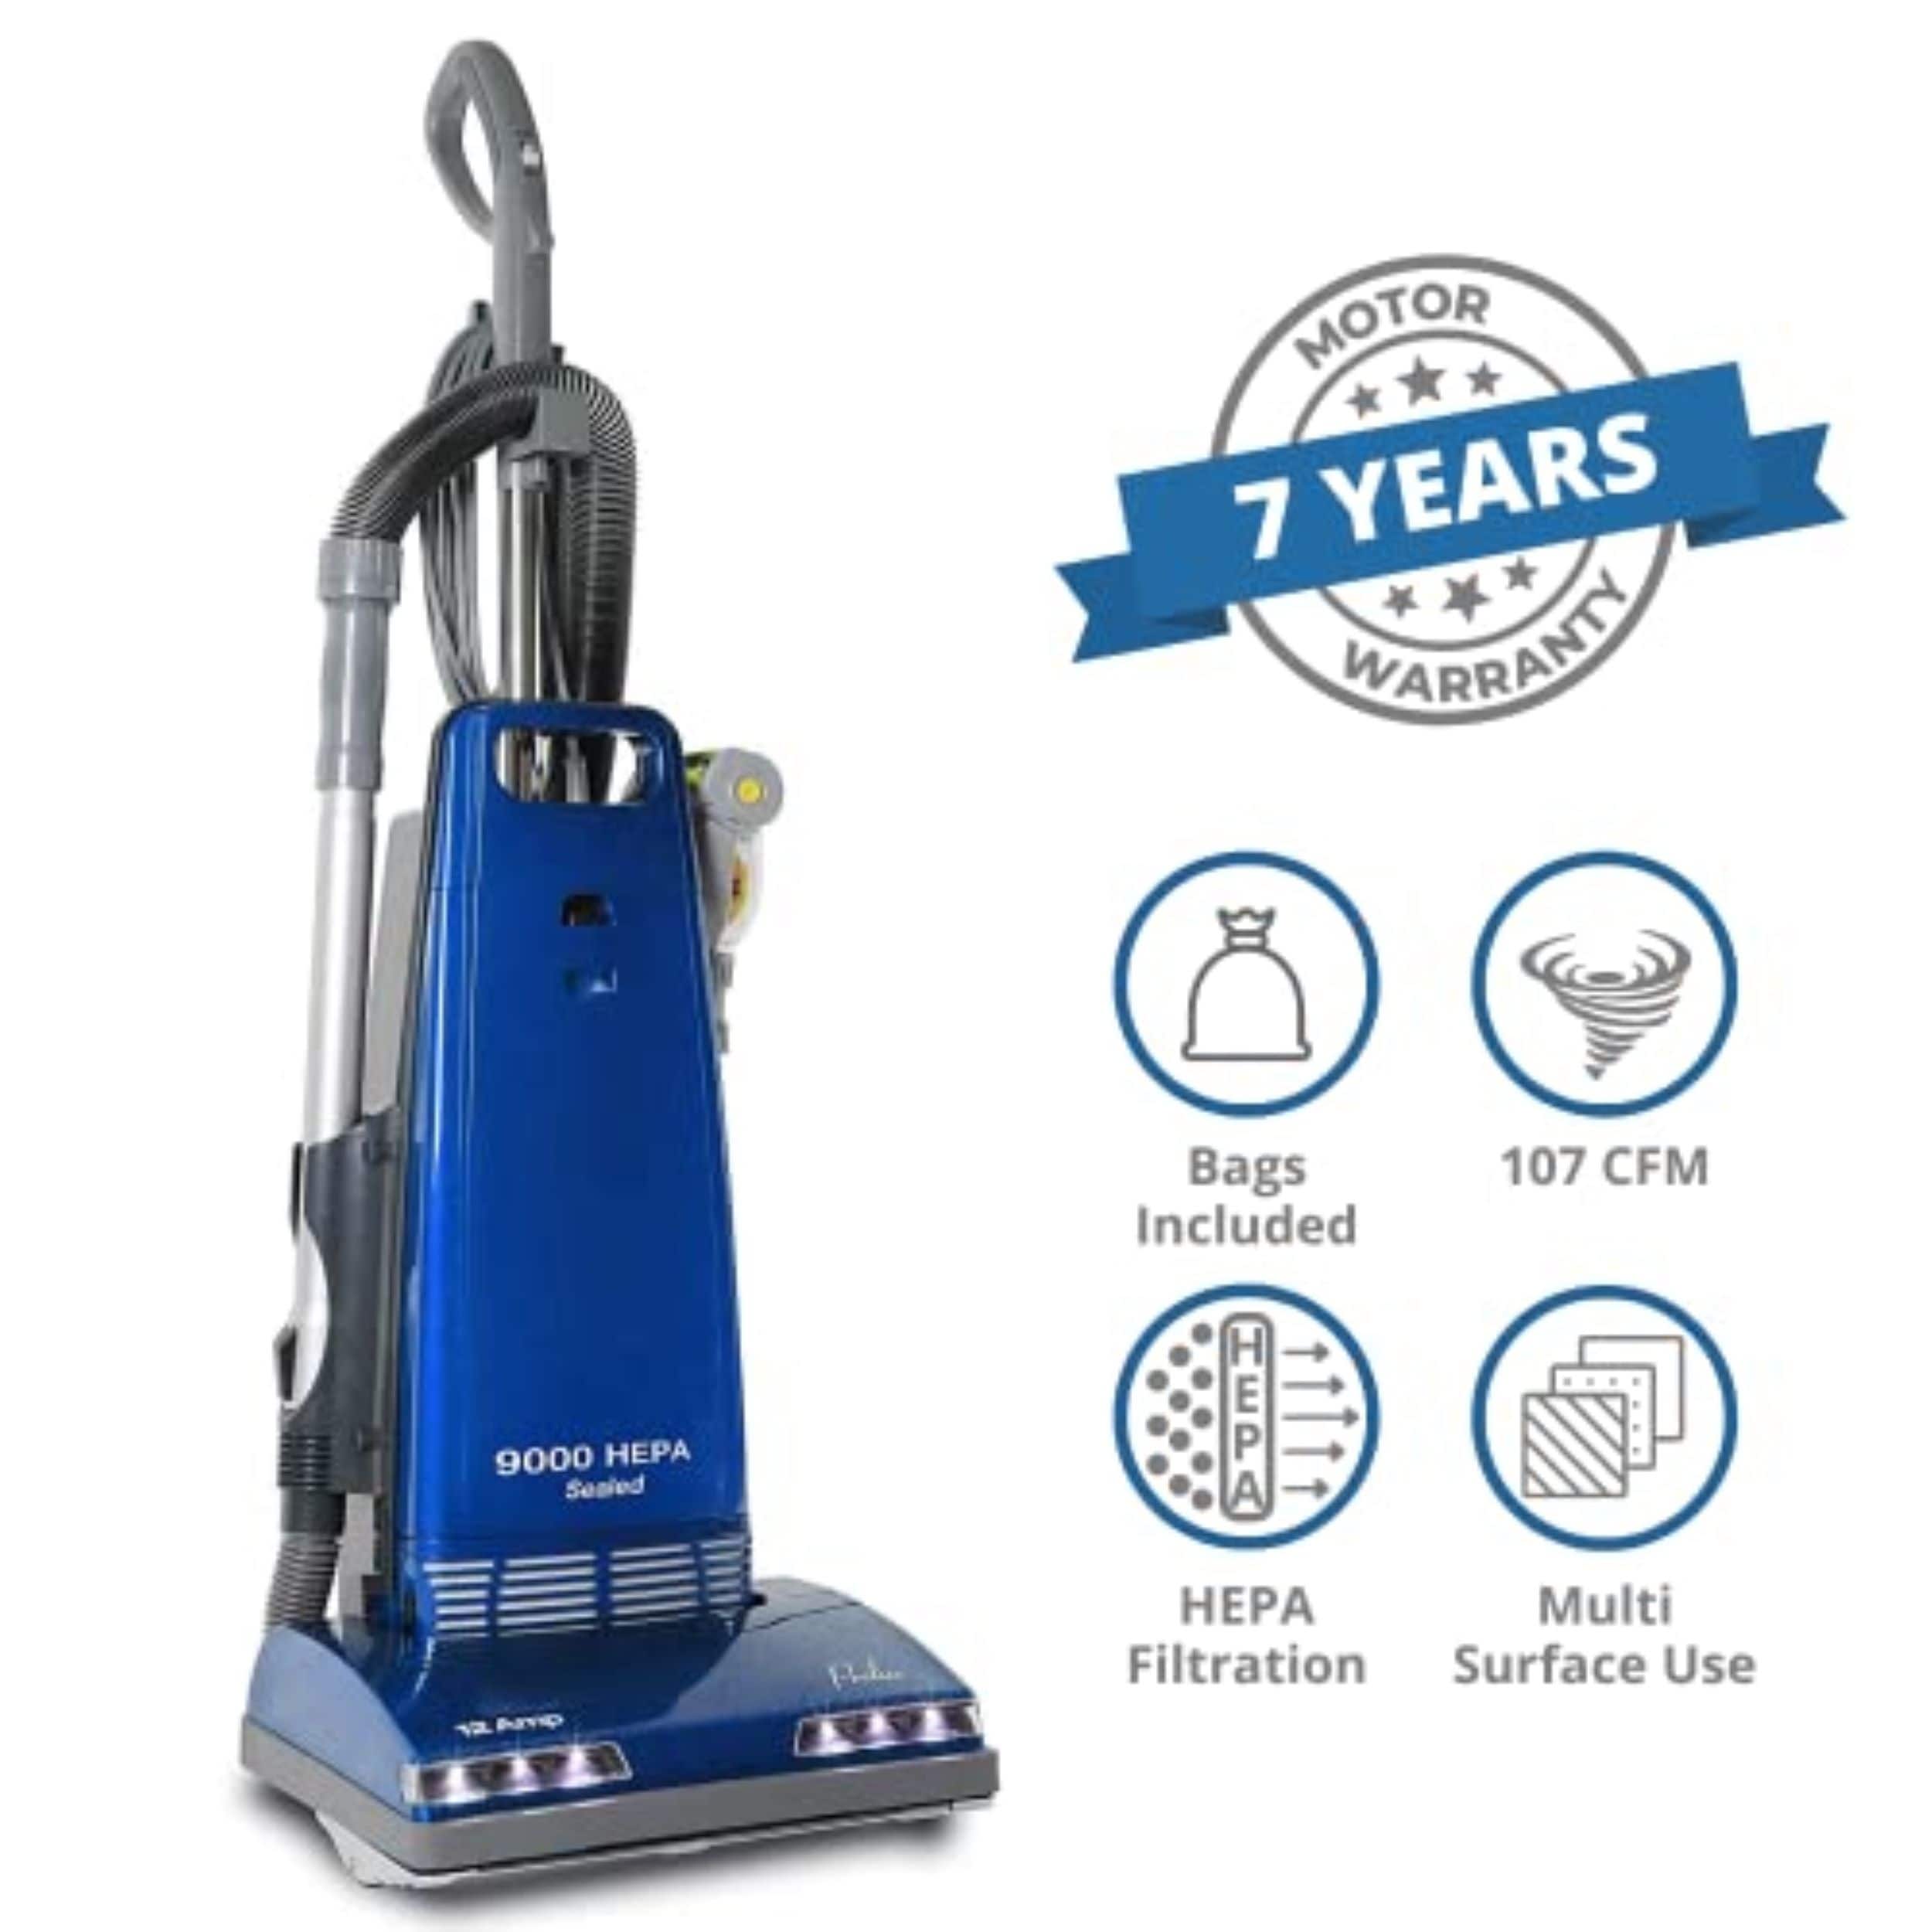 Prolux 9000 Upright Sealed HEPA Vacuum w/12 Amp Motor and Onboard Tools  Bed Bath  Beyond 13747170